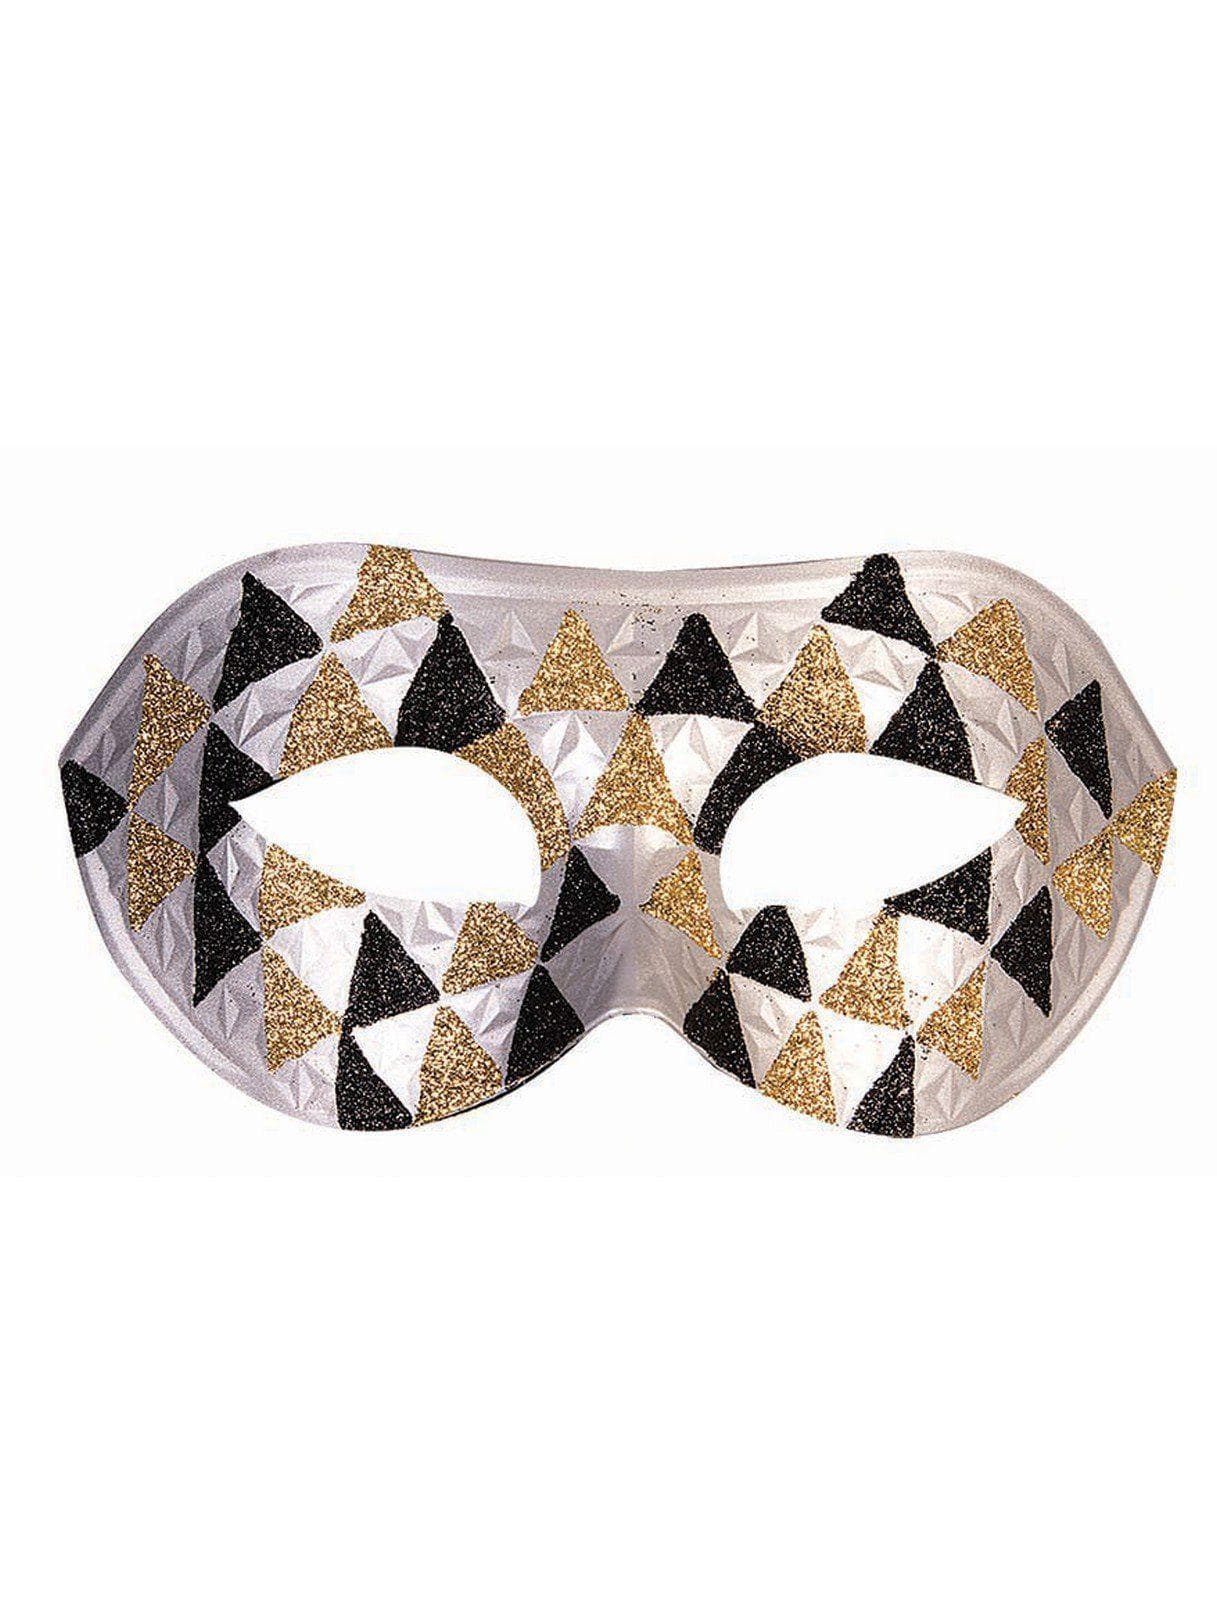 Adult Silver Triangle Harlequin Masquerade Mask - costumes.com